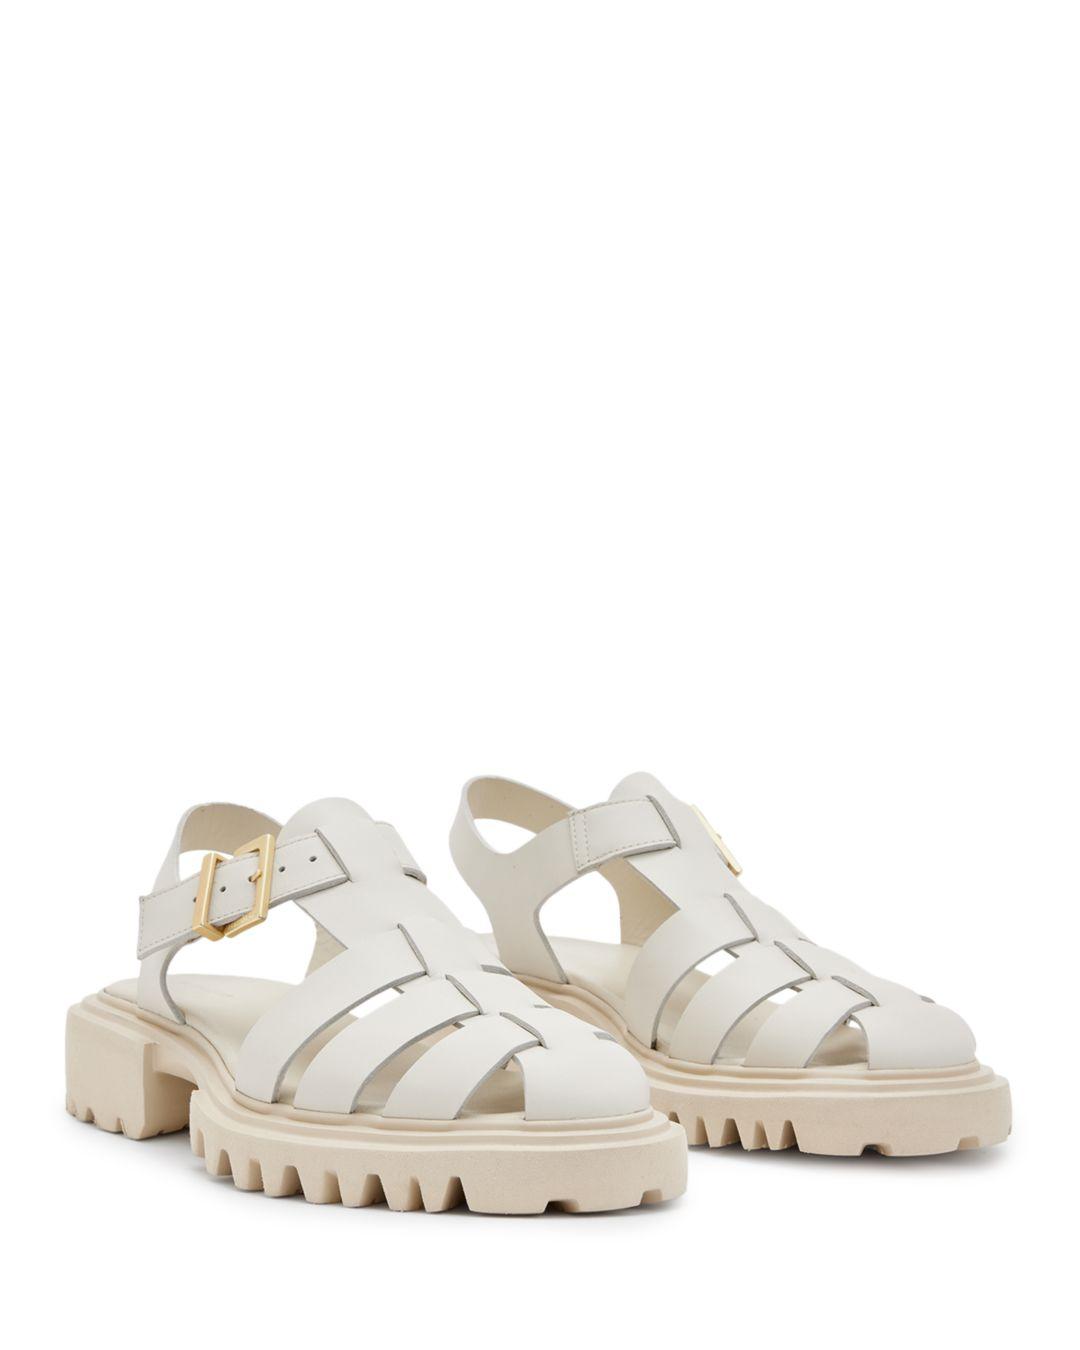 AllSaints Nessie Ankle Strap Woven Fisherman Sandals in White | Lyst